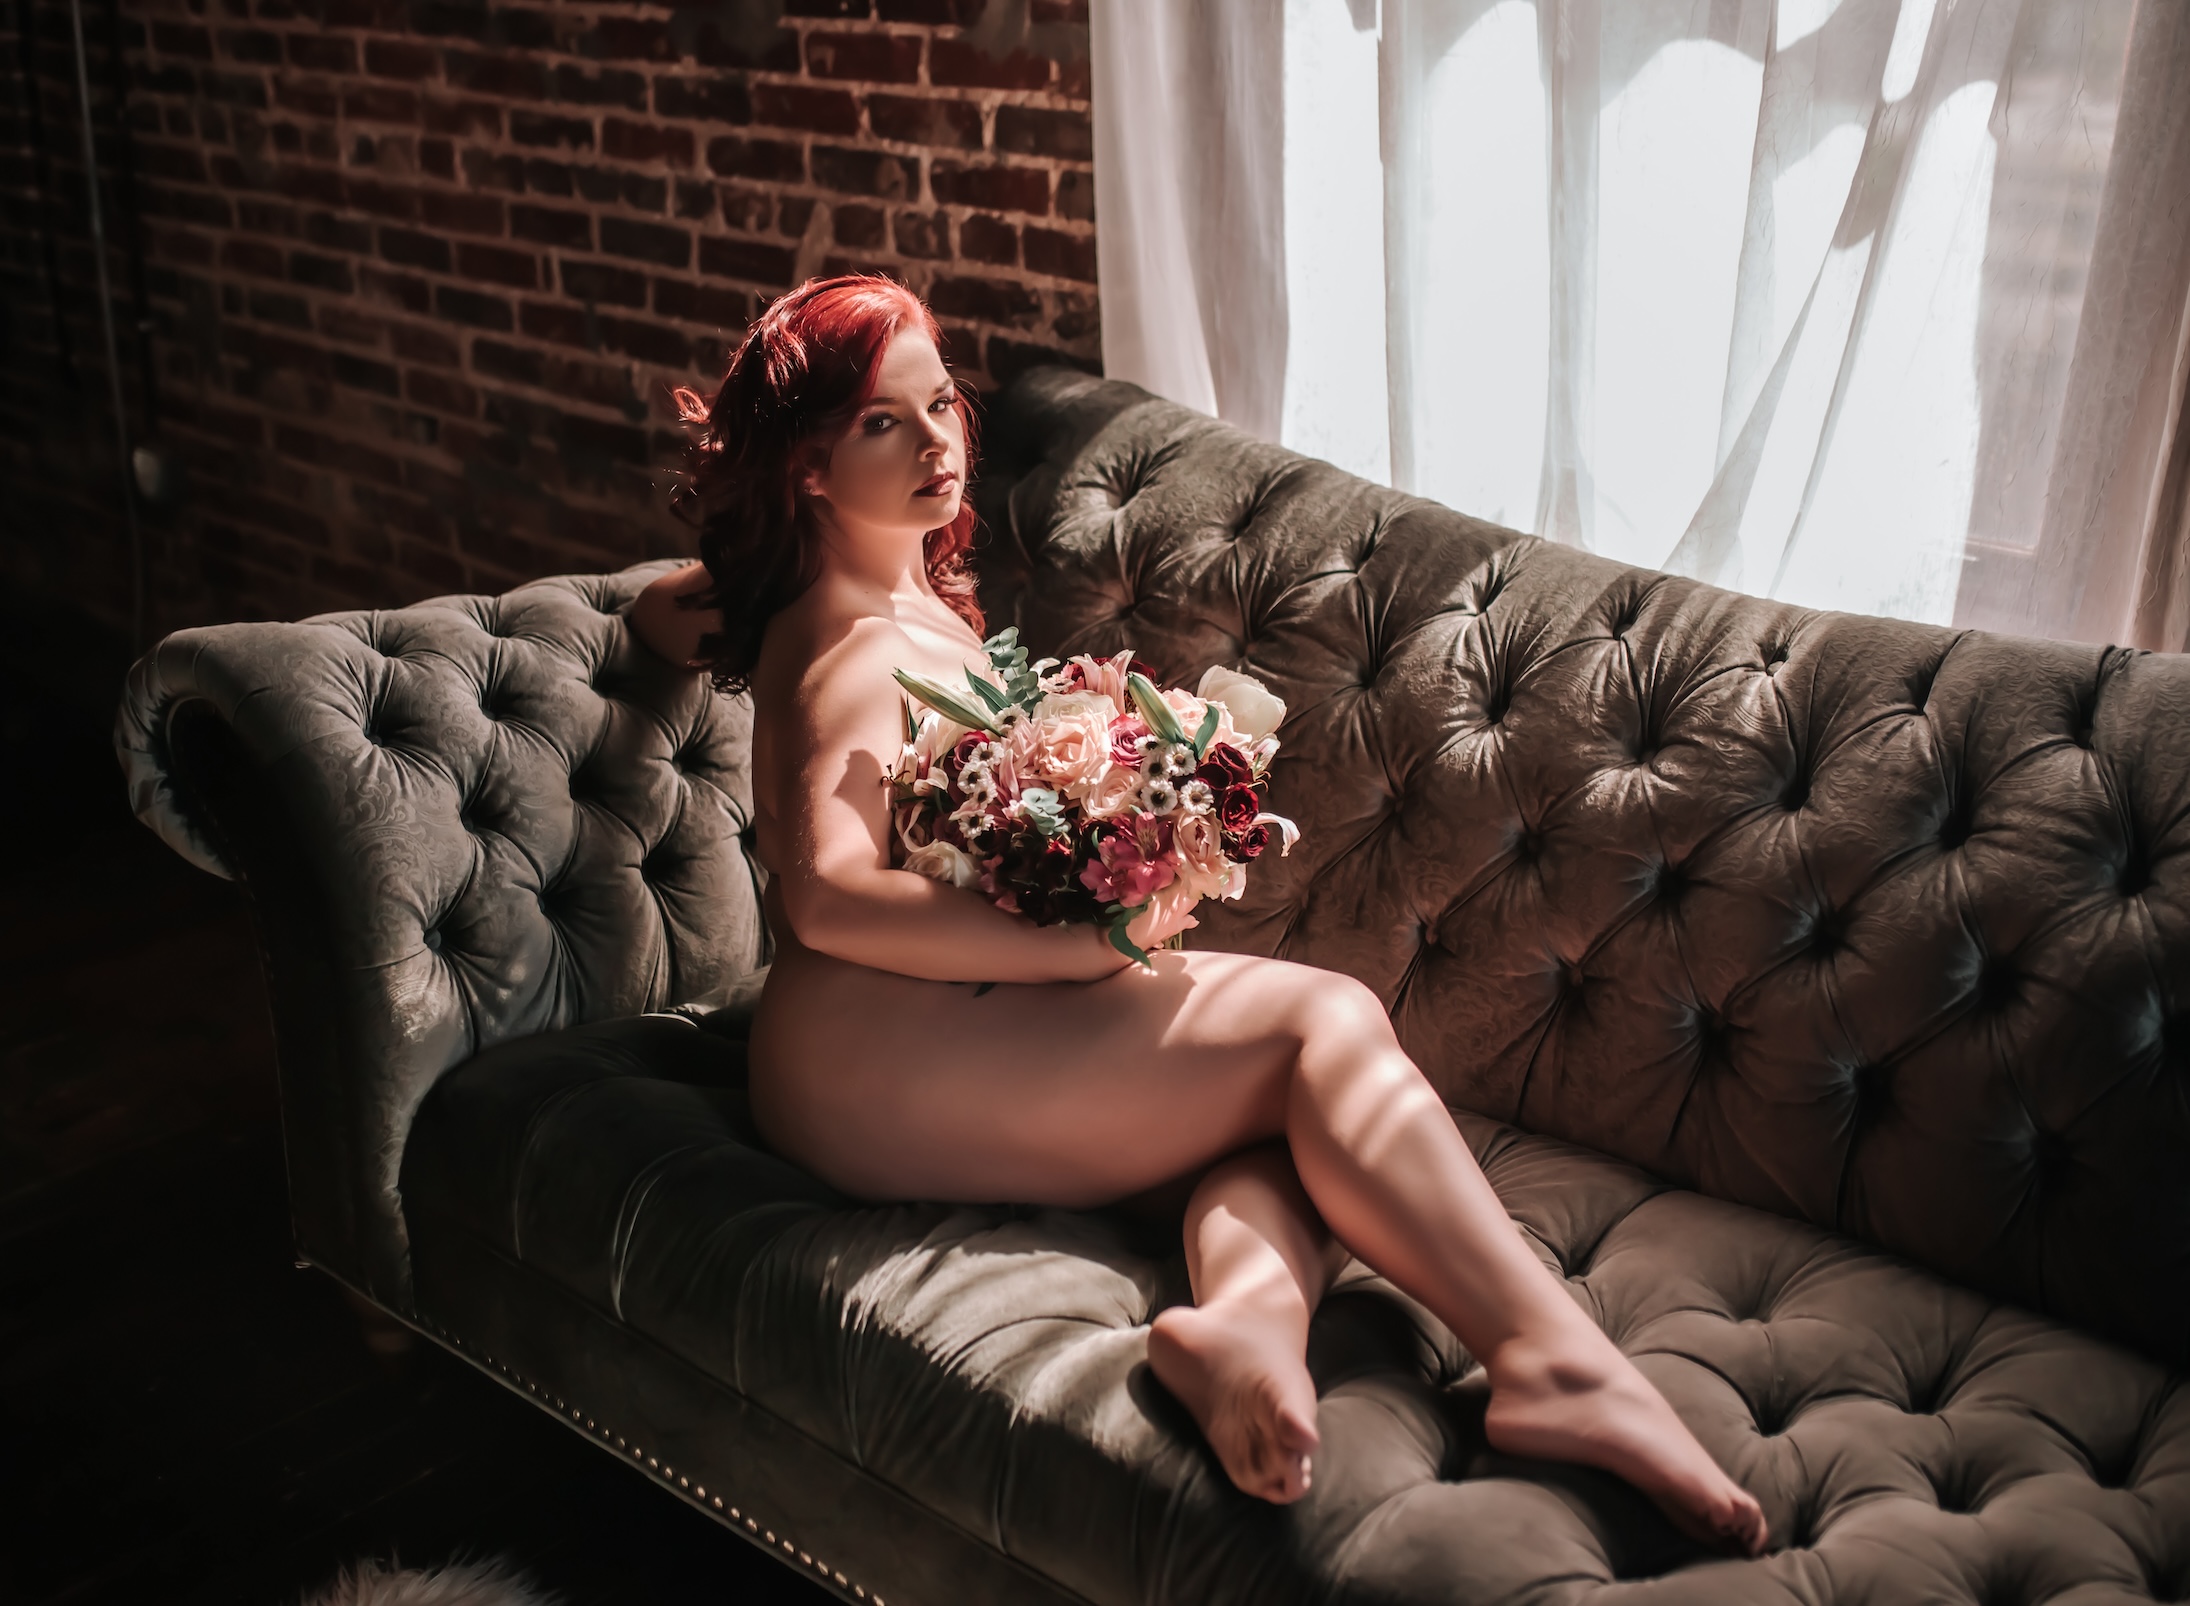 photo of red-haired woman holding a bouquet while lounging on couch